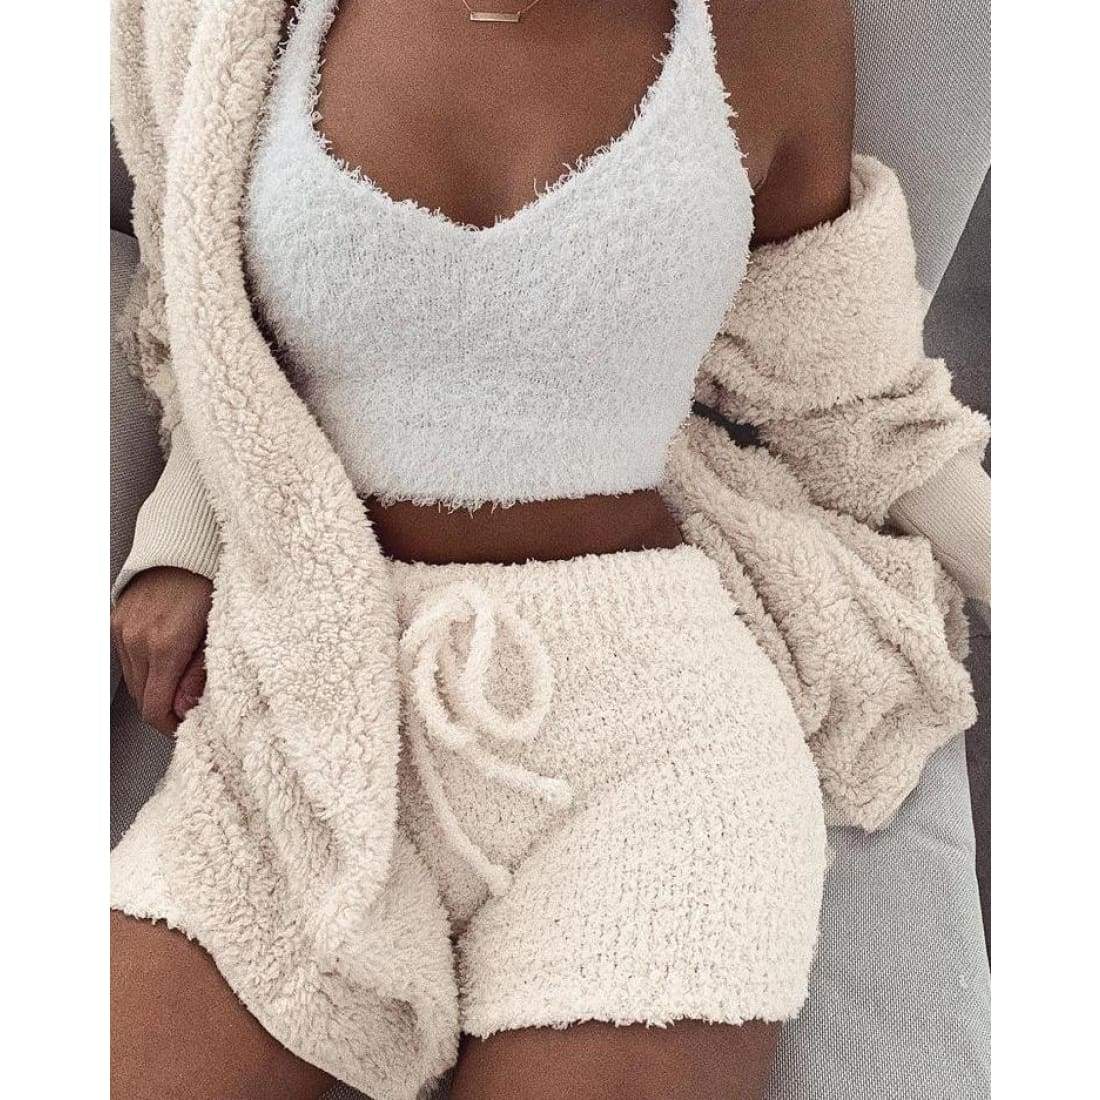 CozyKiss™ Deluxe 3-Piece Knit Set